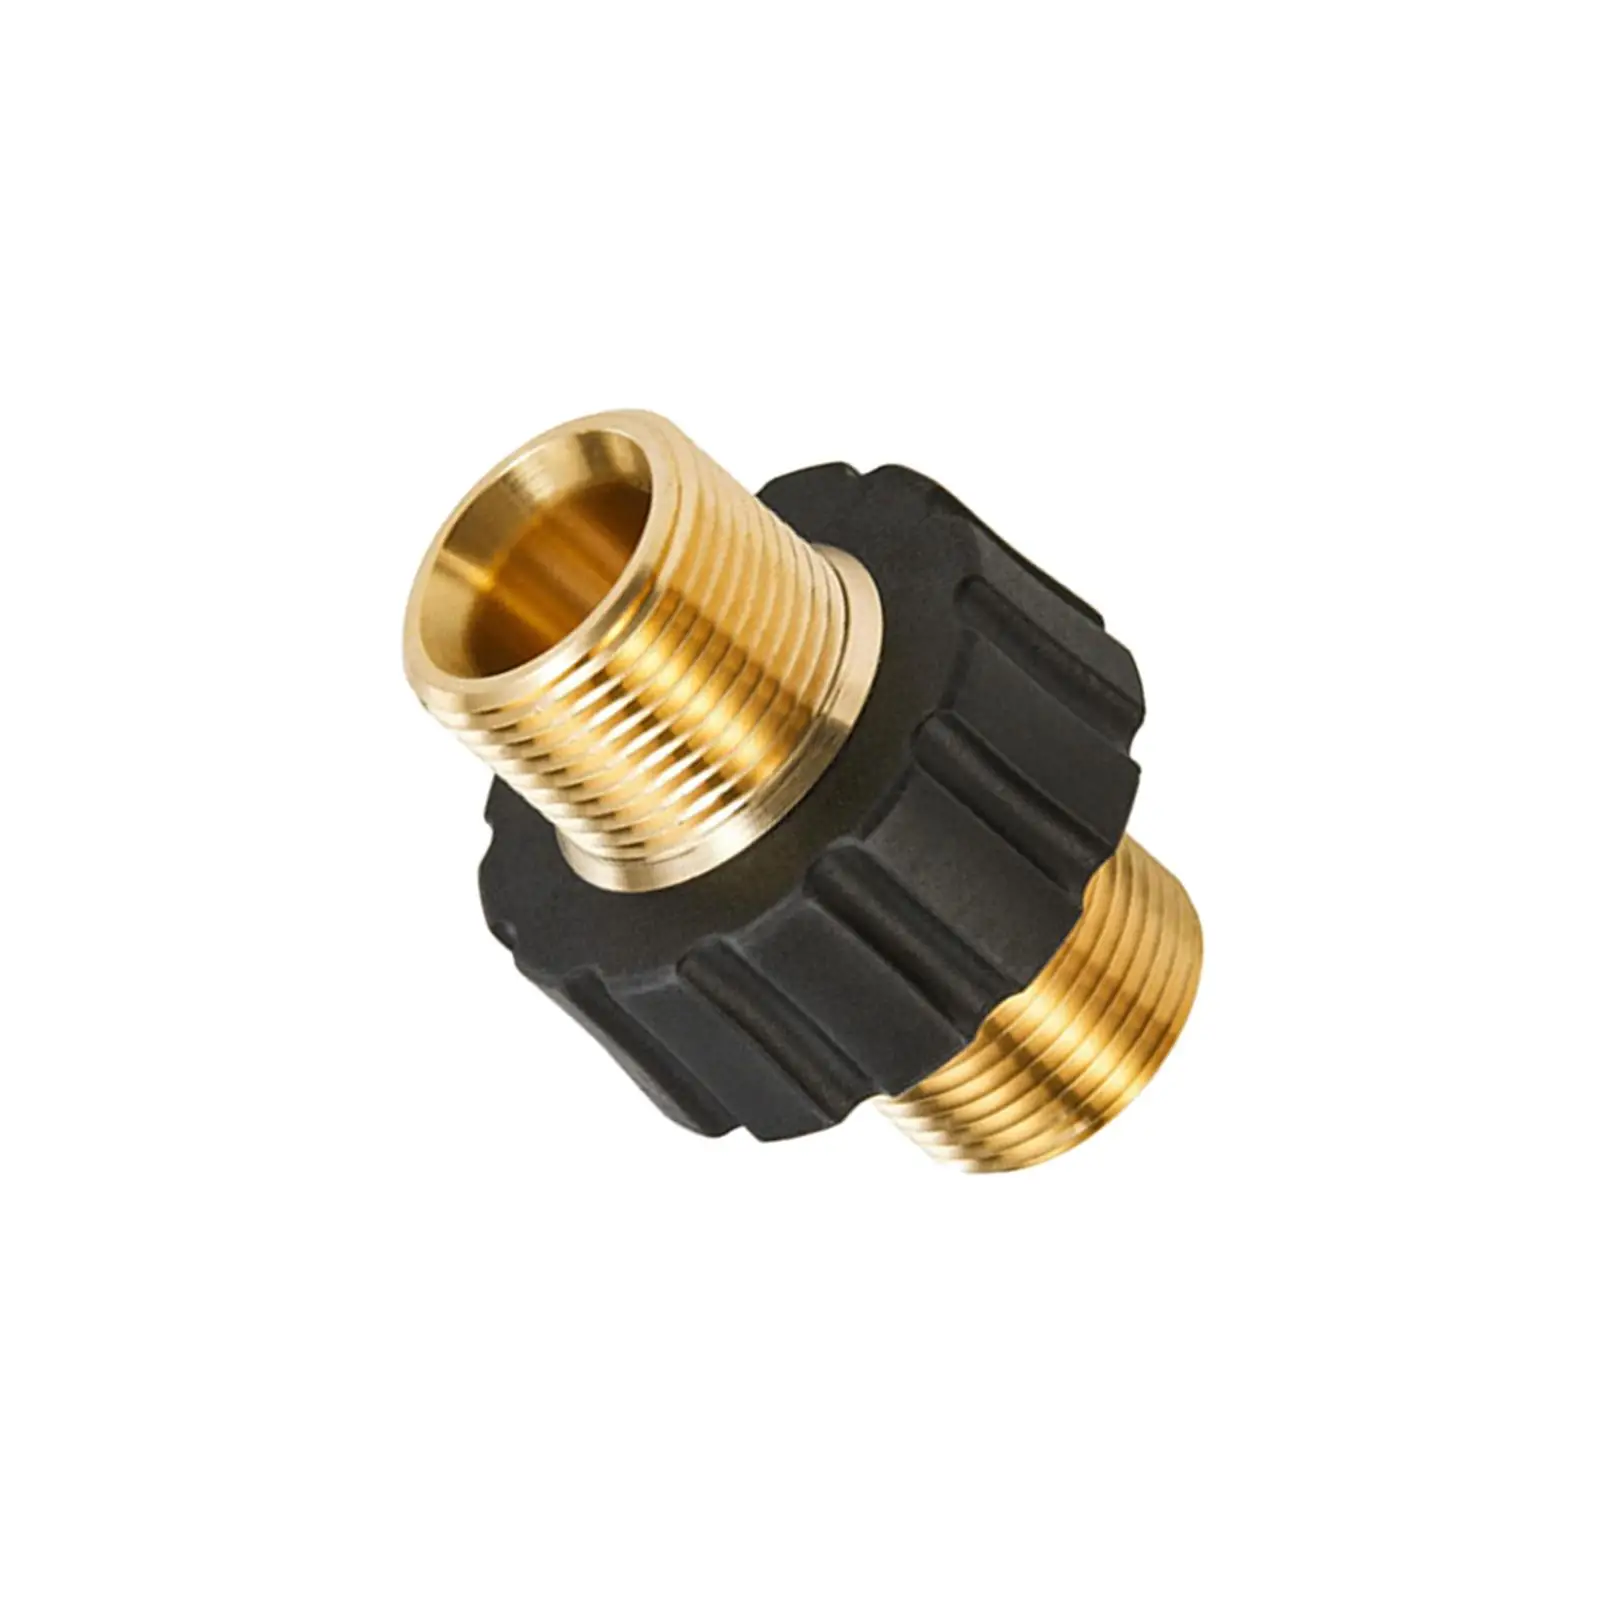 M22 14mm Male Brass High Pressure Washer Coupler Adapter, Garden Pipe Hose Parts 5000 PSI for Gardening